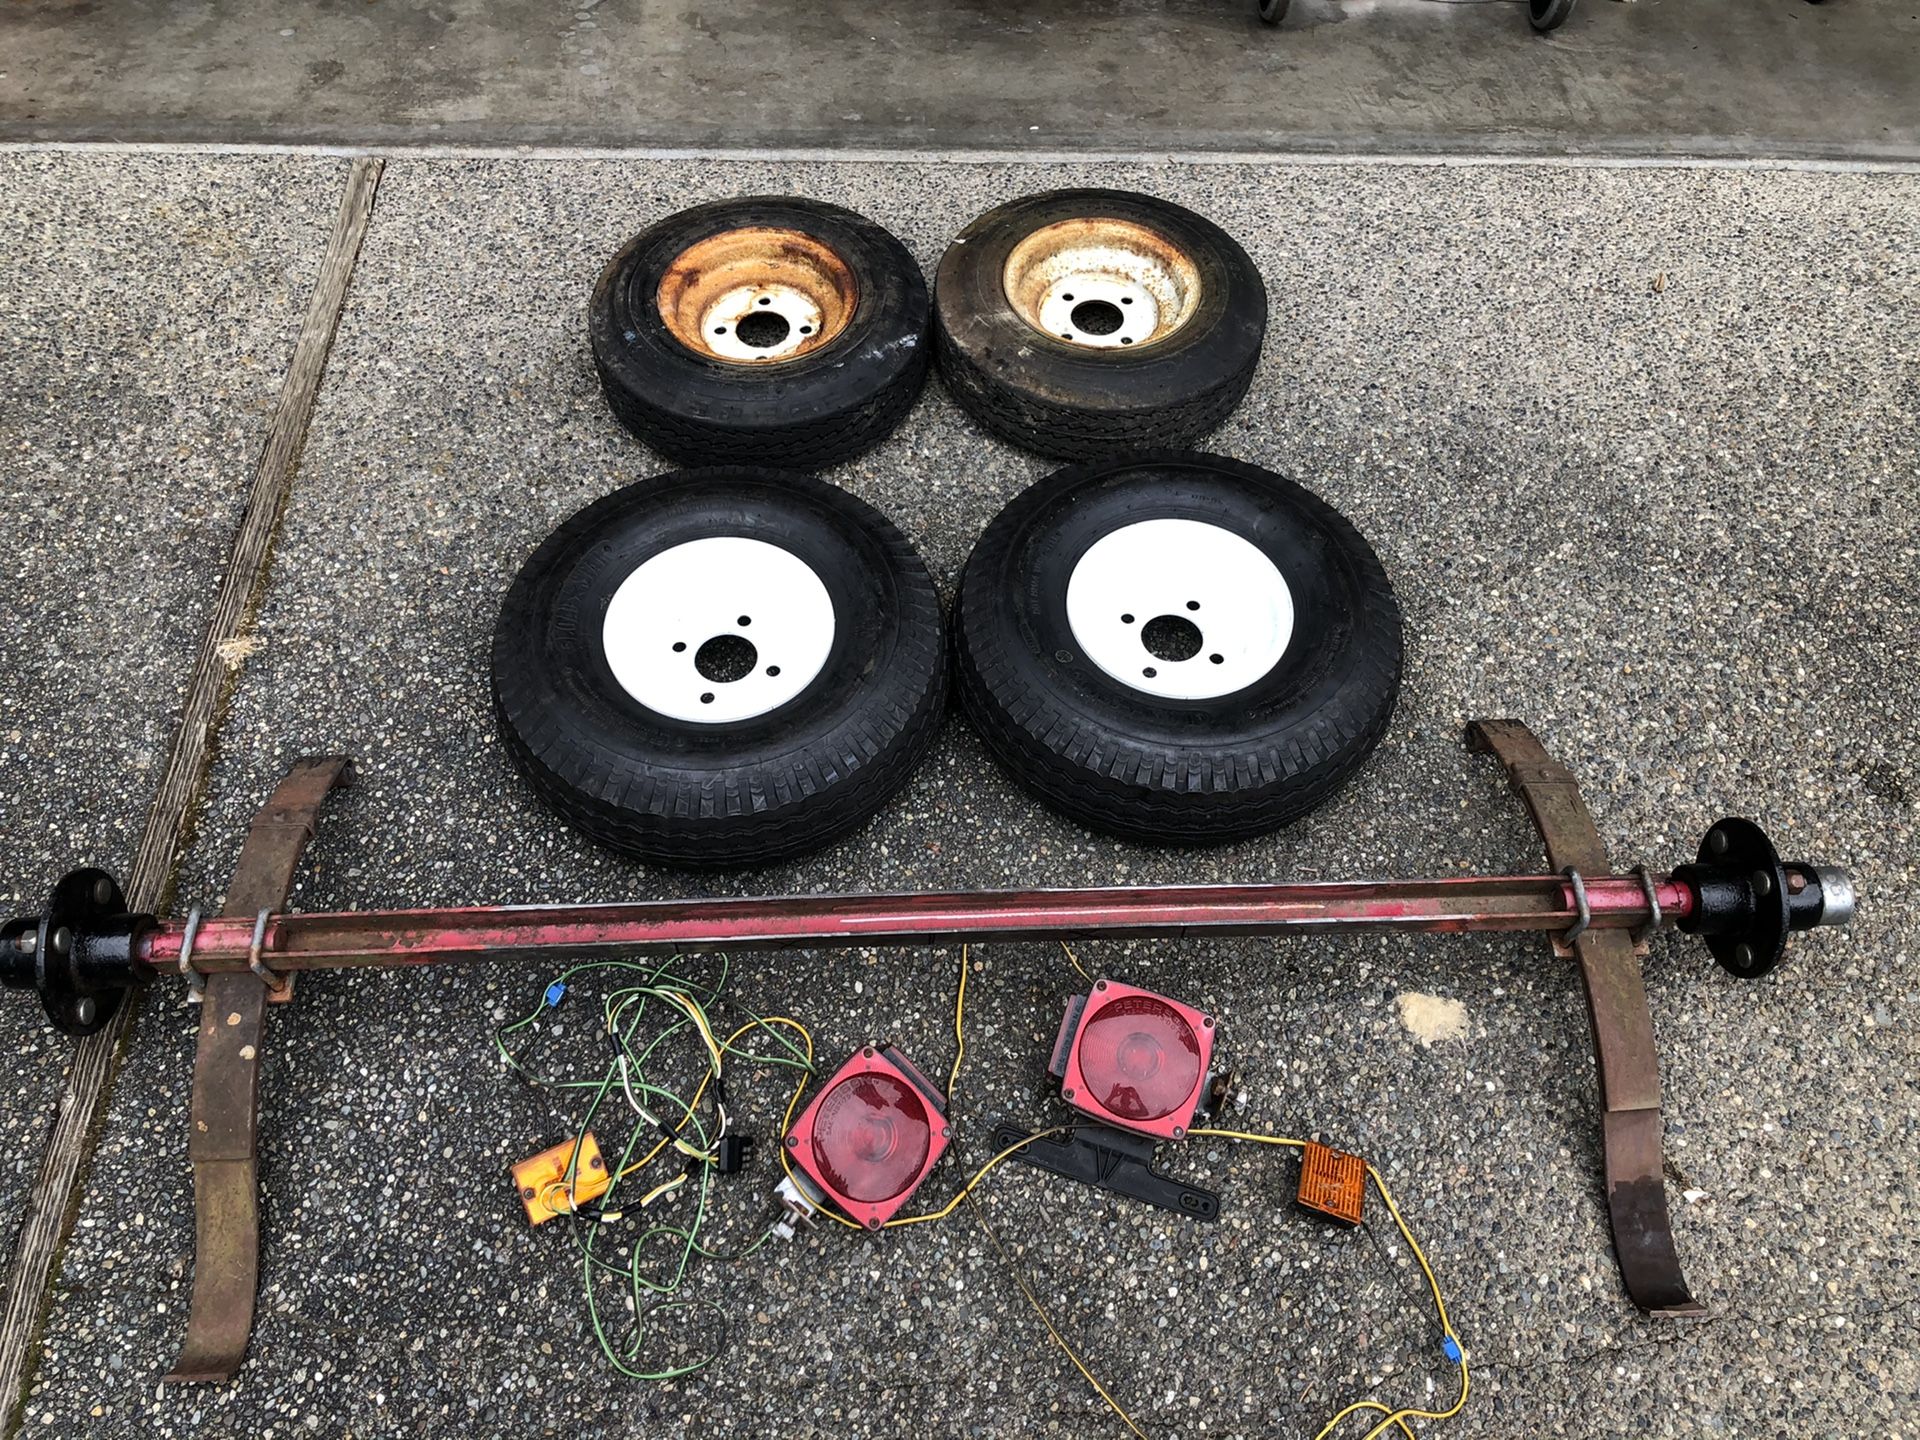 Trailer Axle, Tires and Lights